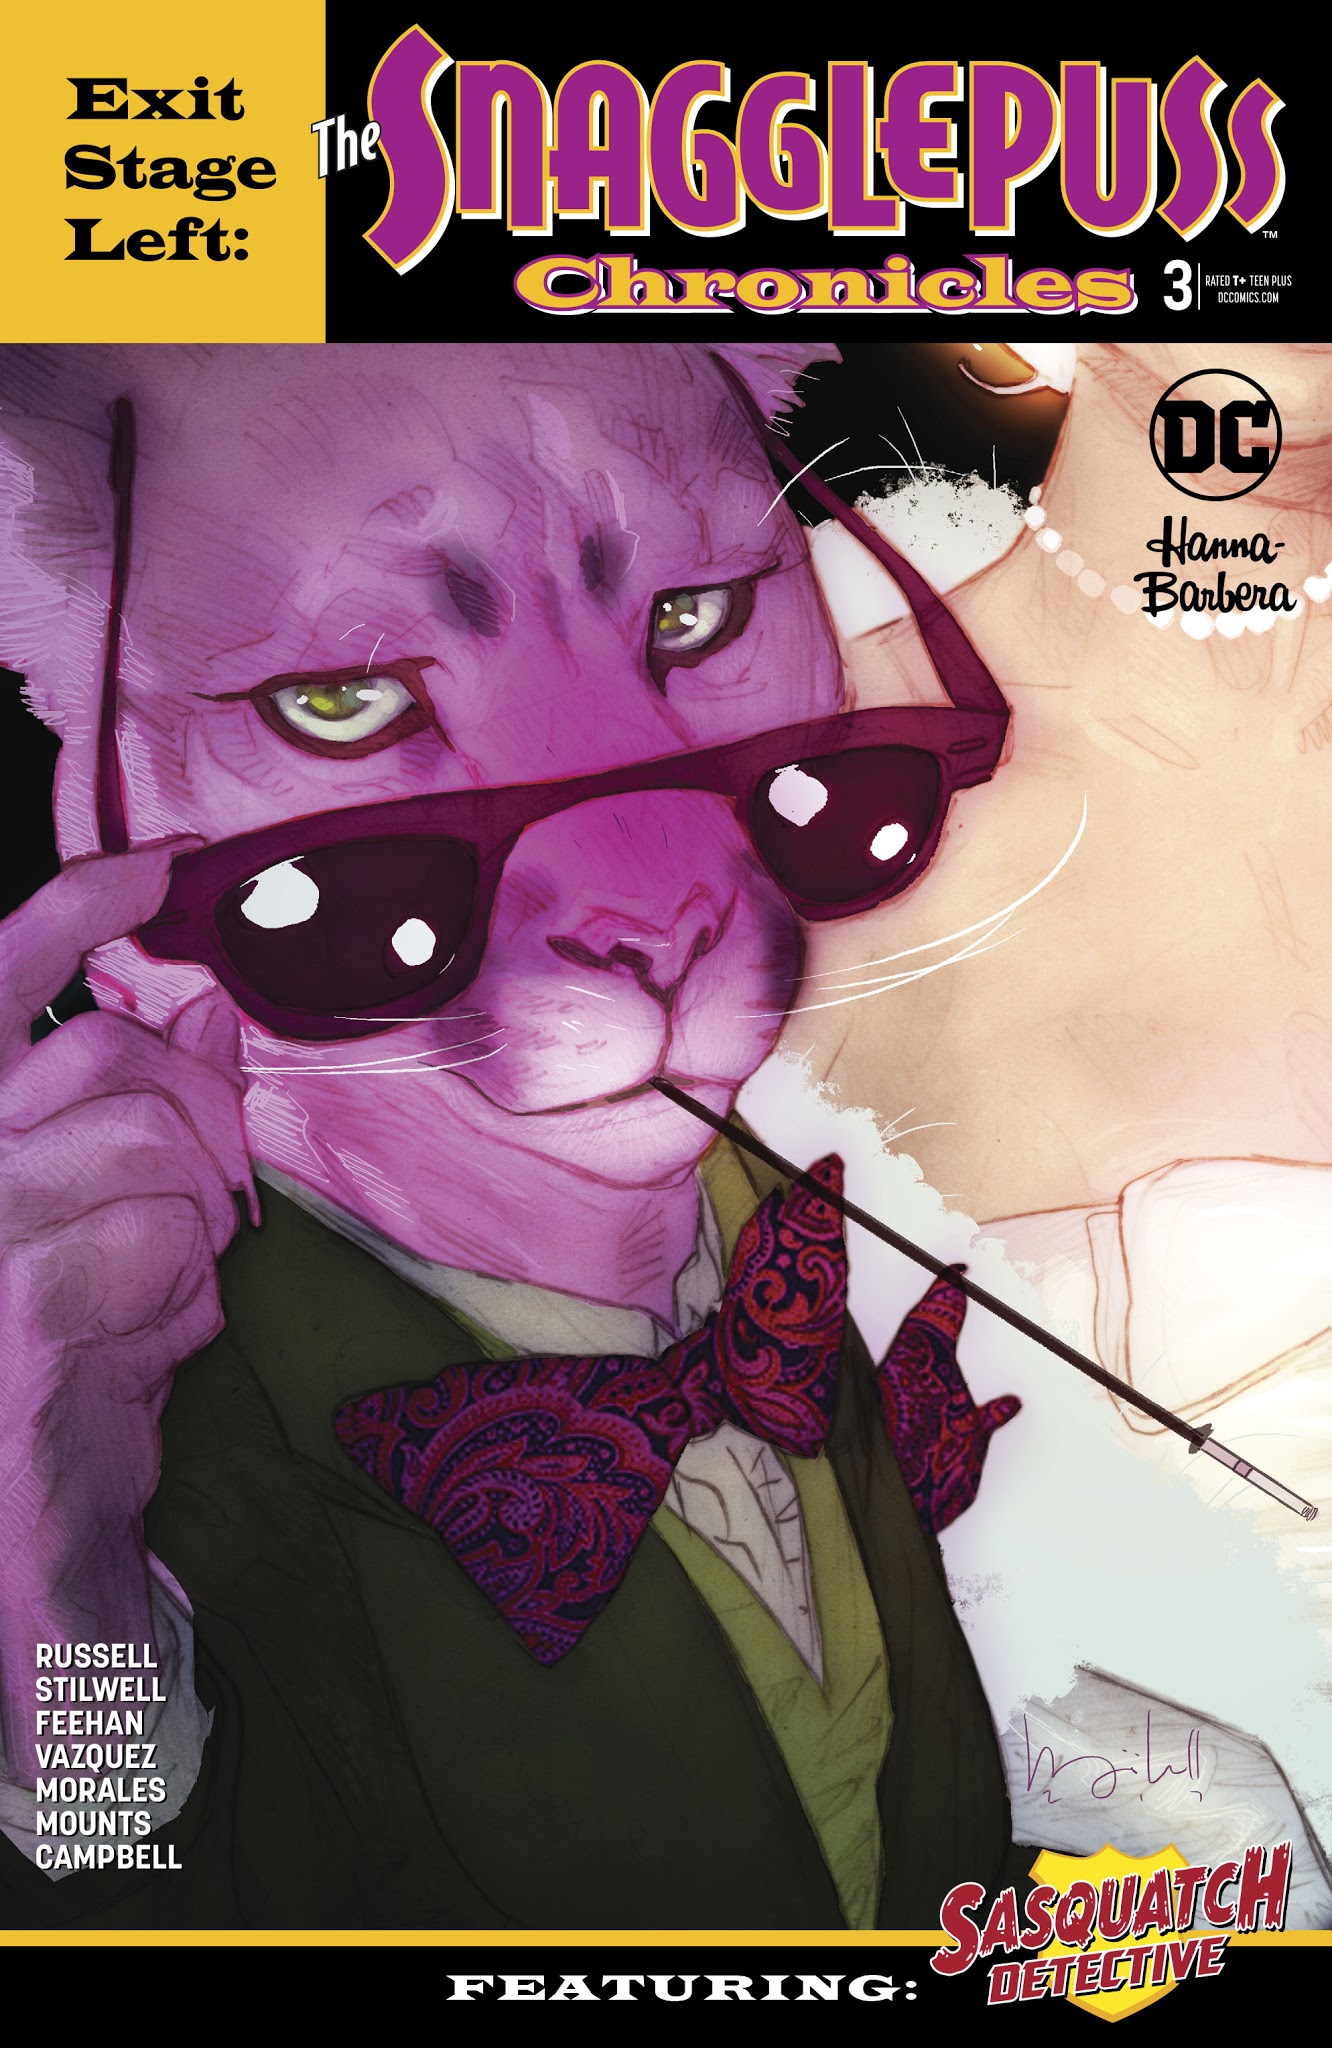 Read online Exit Stage Left: The Snagglepuss Chronicles comic -  Issue #3 - 1